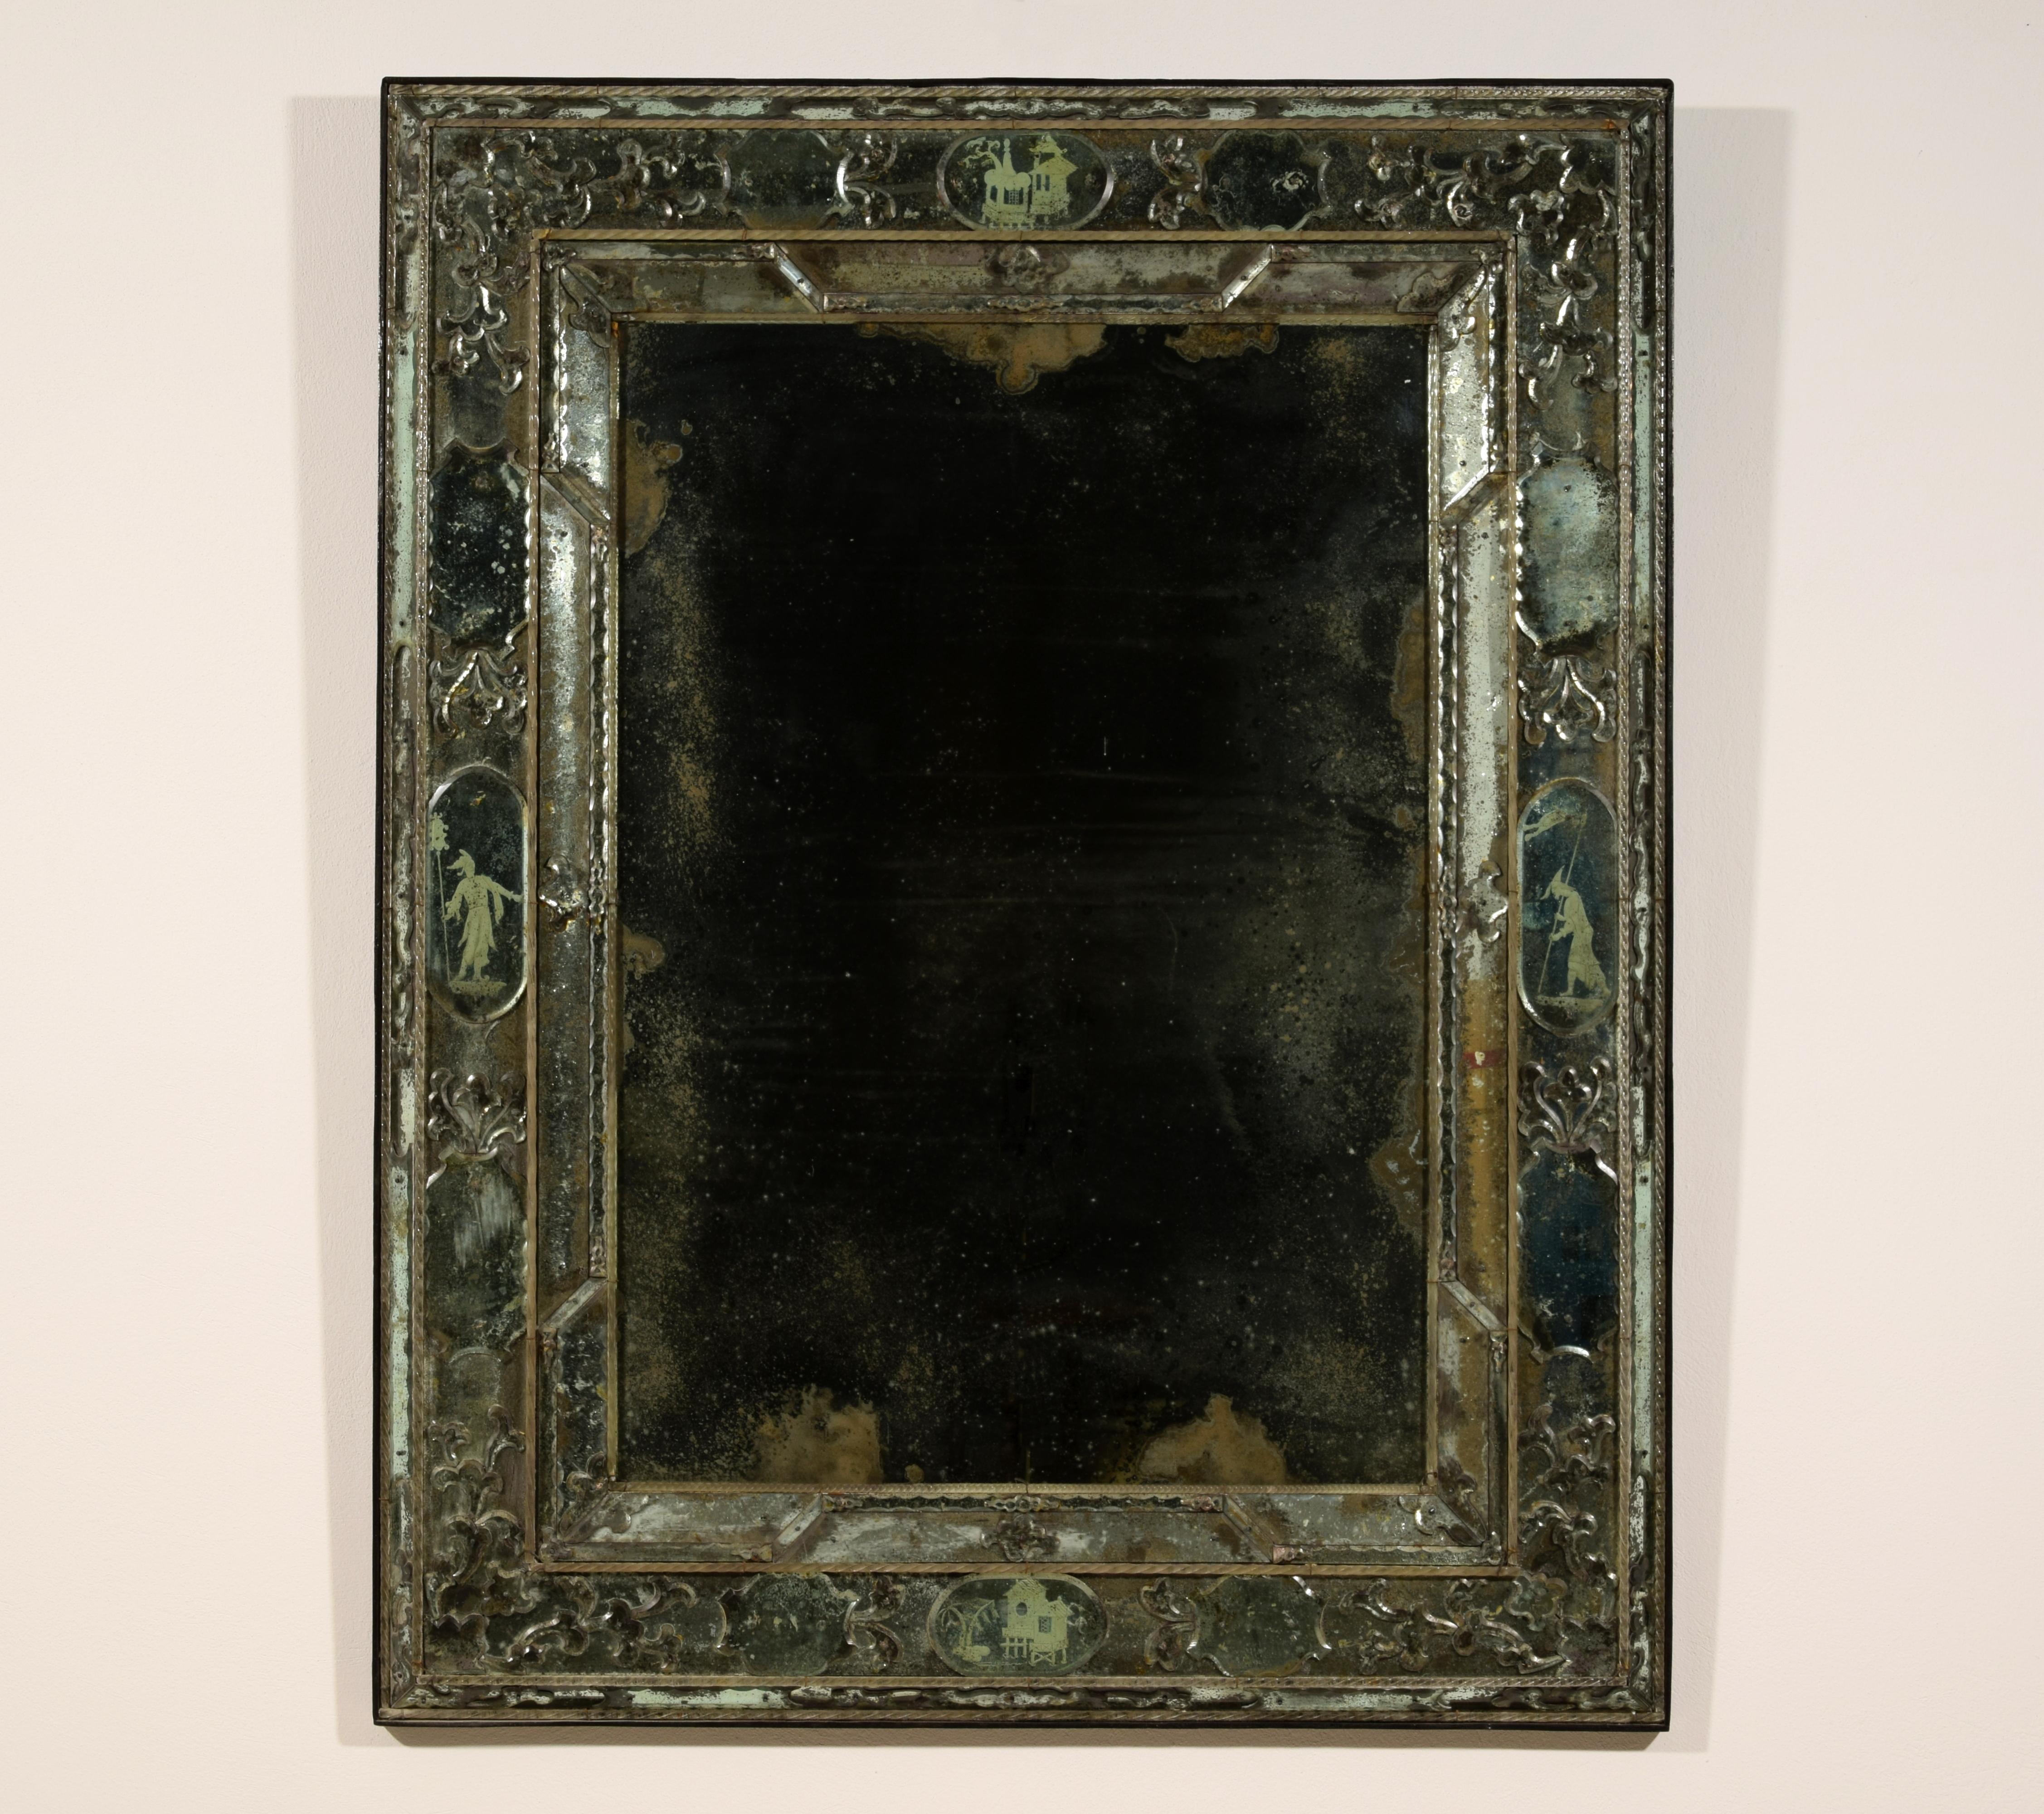 20th century, Venetian Mirror
These refined mirror was made in Murano, Venice, in the 20th century, in the style widespread in the lagoon city in the early eighteenth century. The mirror is presented inside complex frames made through the